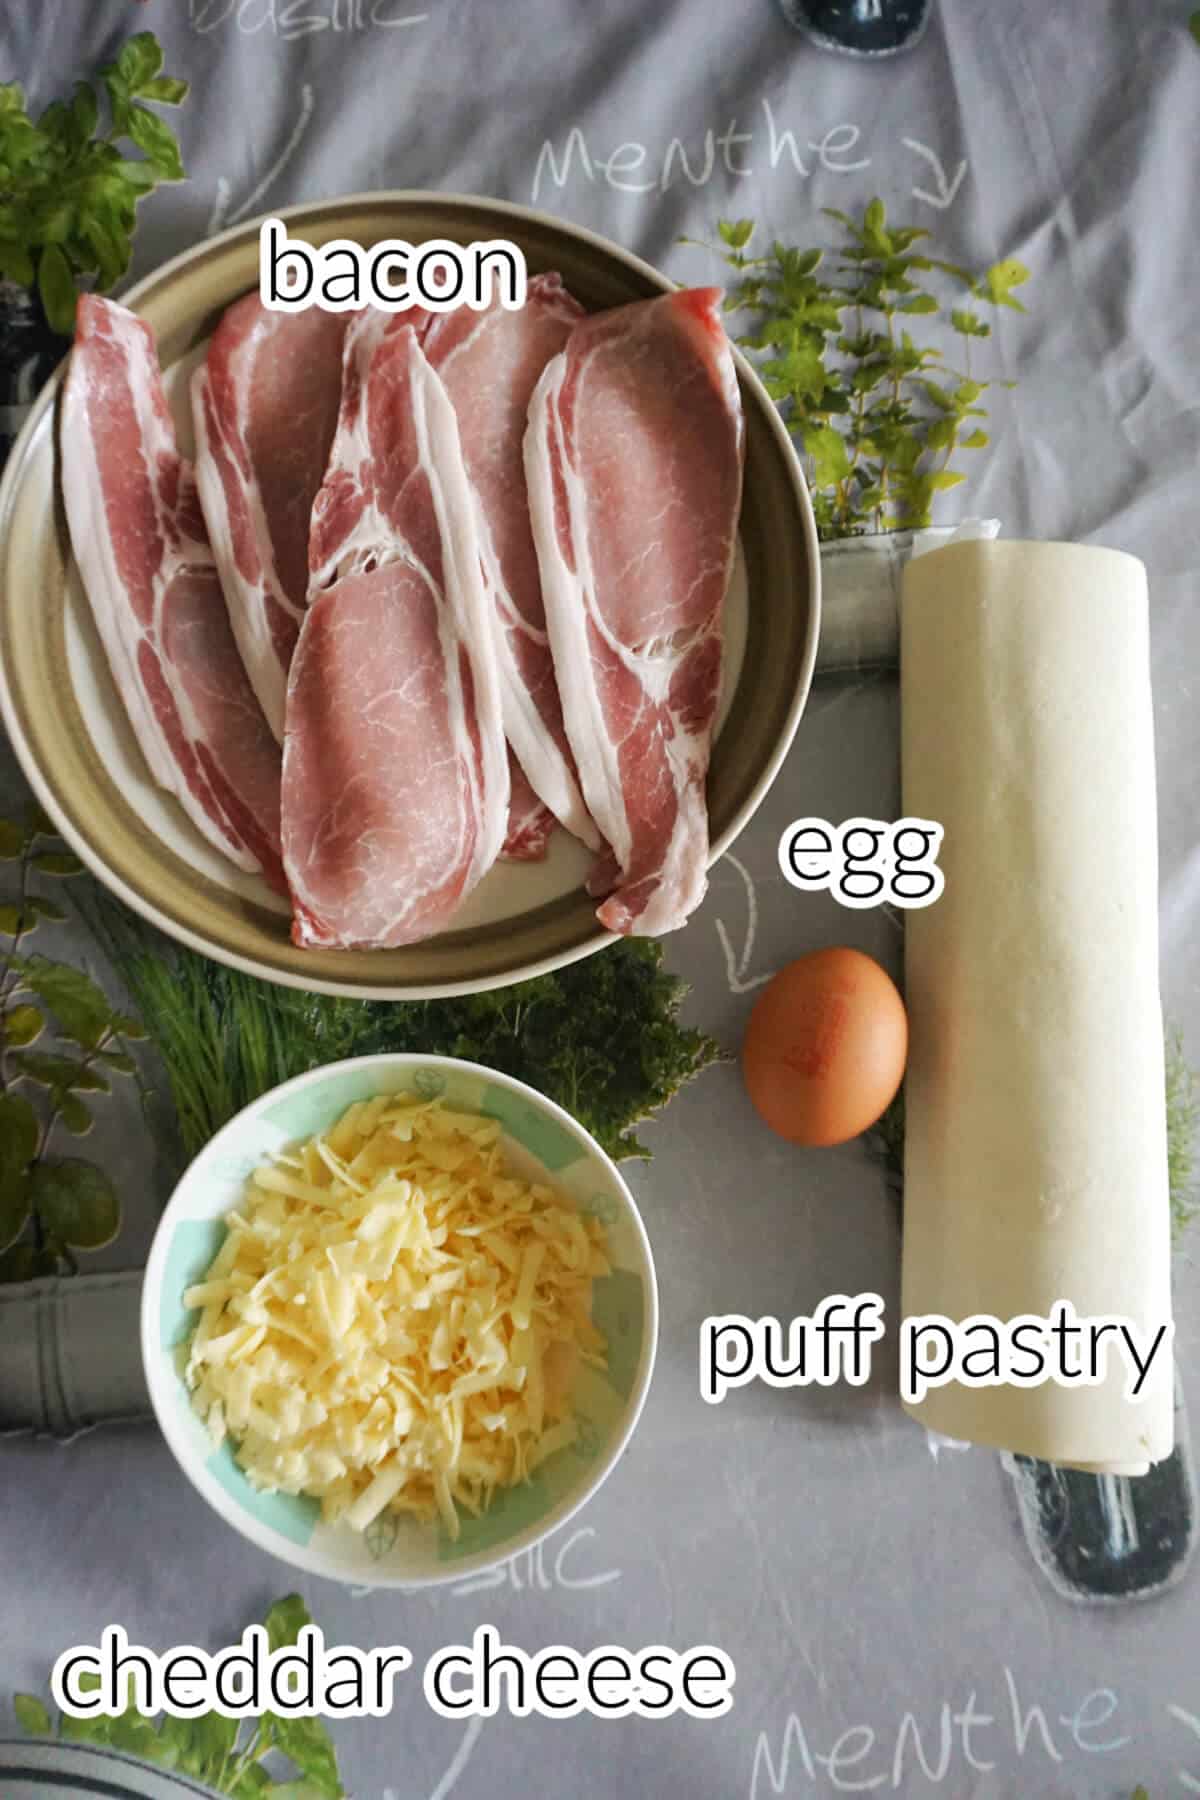 Ingredients used to make cheese and bacon turnovers.